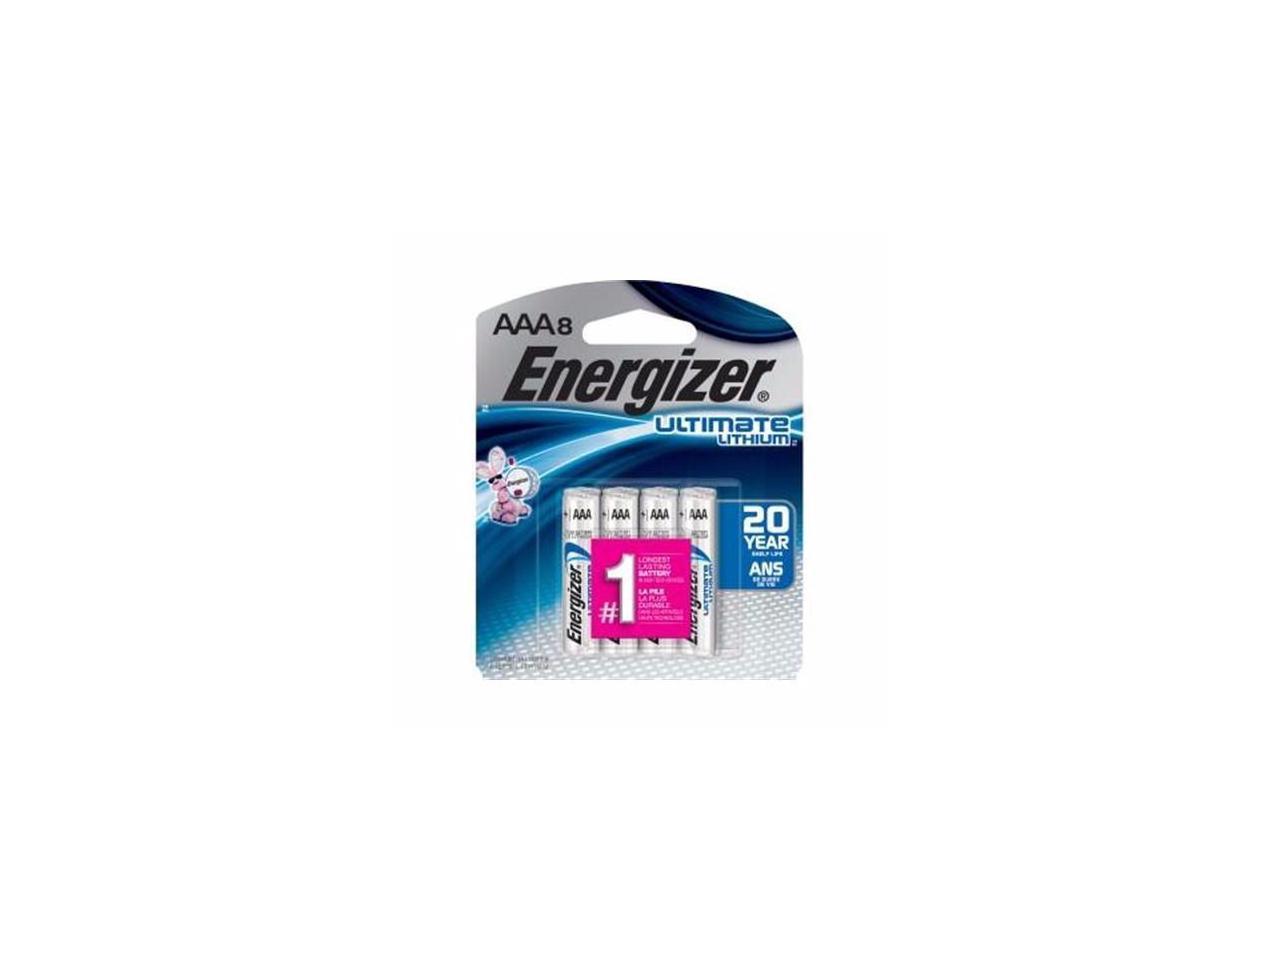 ENERGIZER Ultimate Lithium AAA Battery, 8-pack 39800130778 | eBay